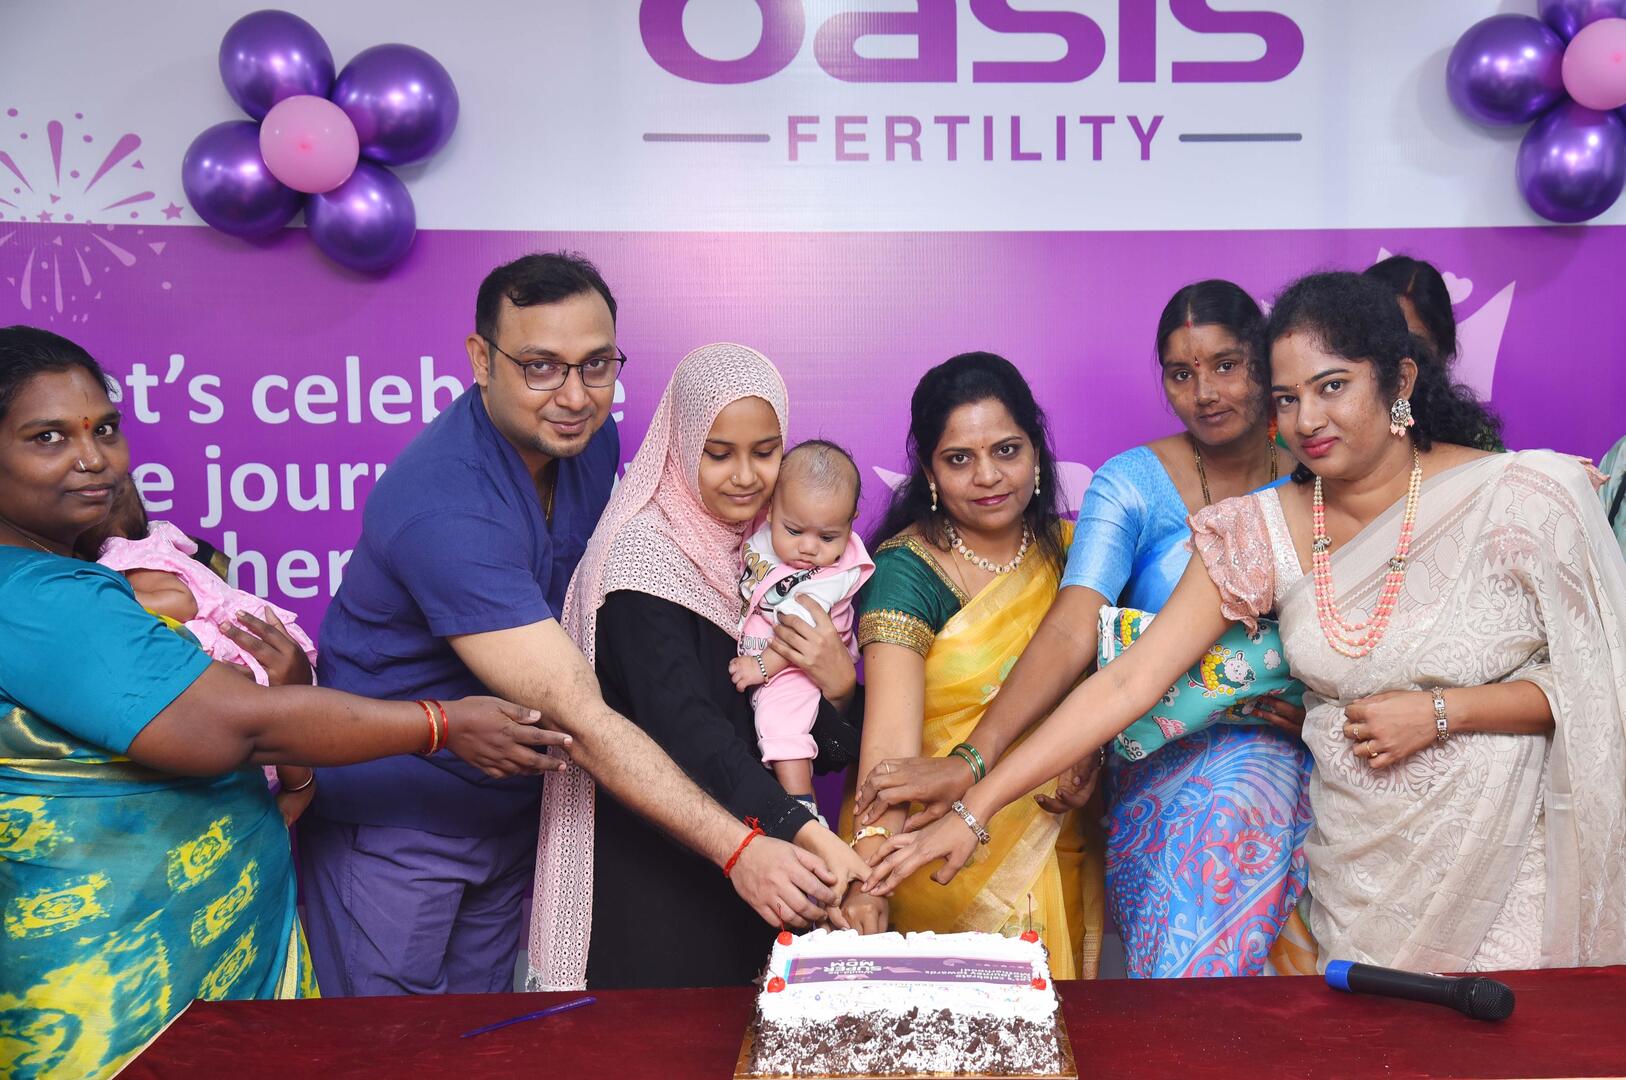 Oasis Fertility, Kurnool celebrates 2nd year Anniversary by felicitating mom-to-be and IVF babies